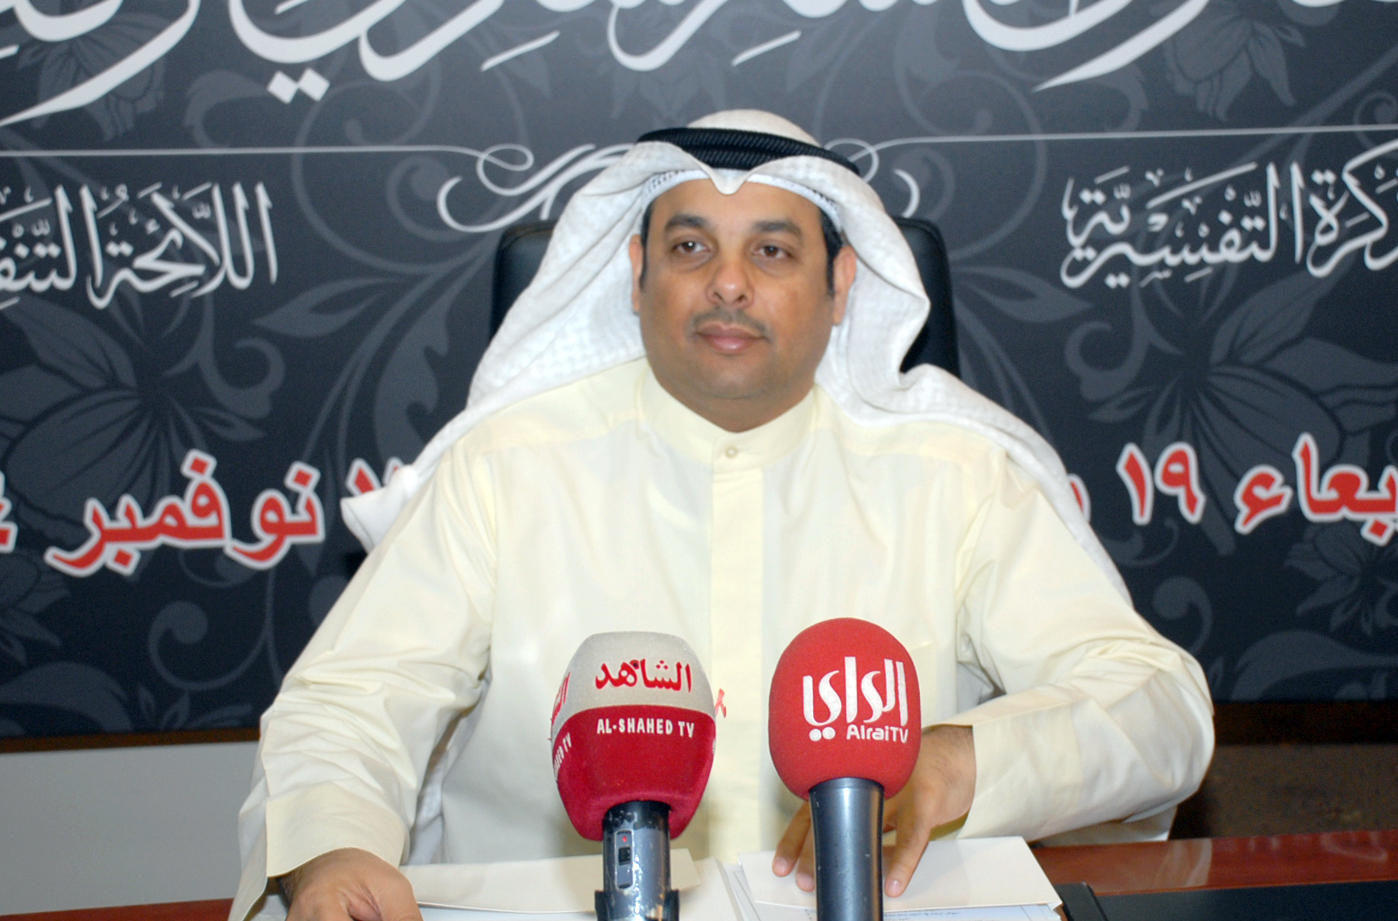 Minister of Justice and Minister of Awqaf and Islamic Affairs Yaaqob Al-Sanea